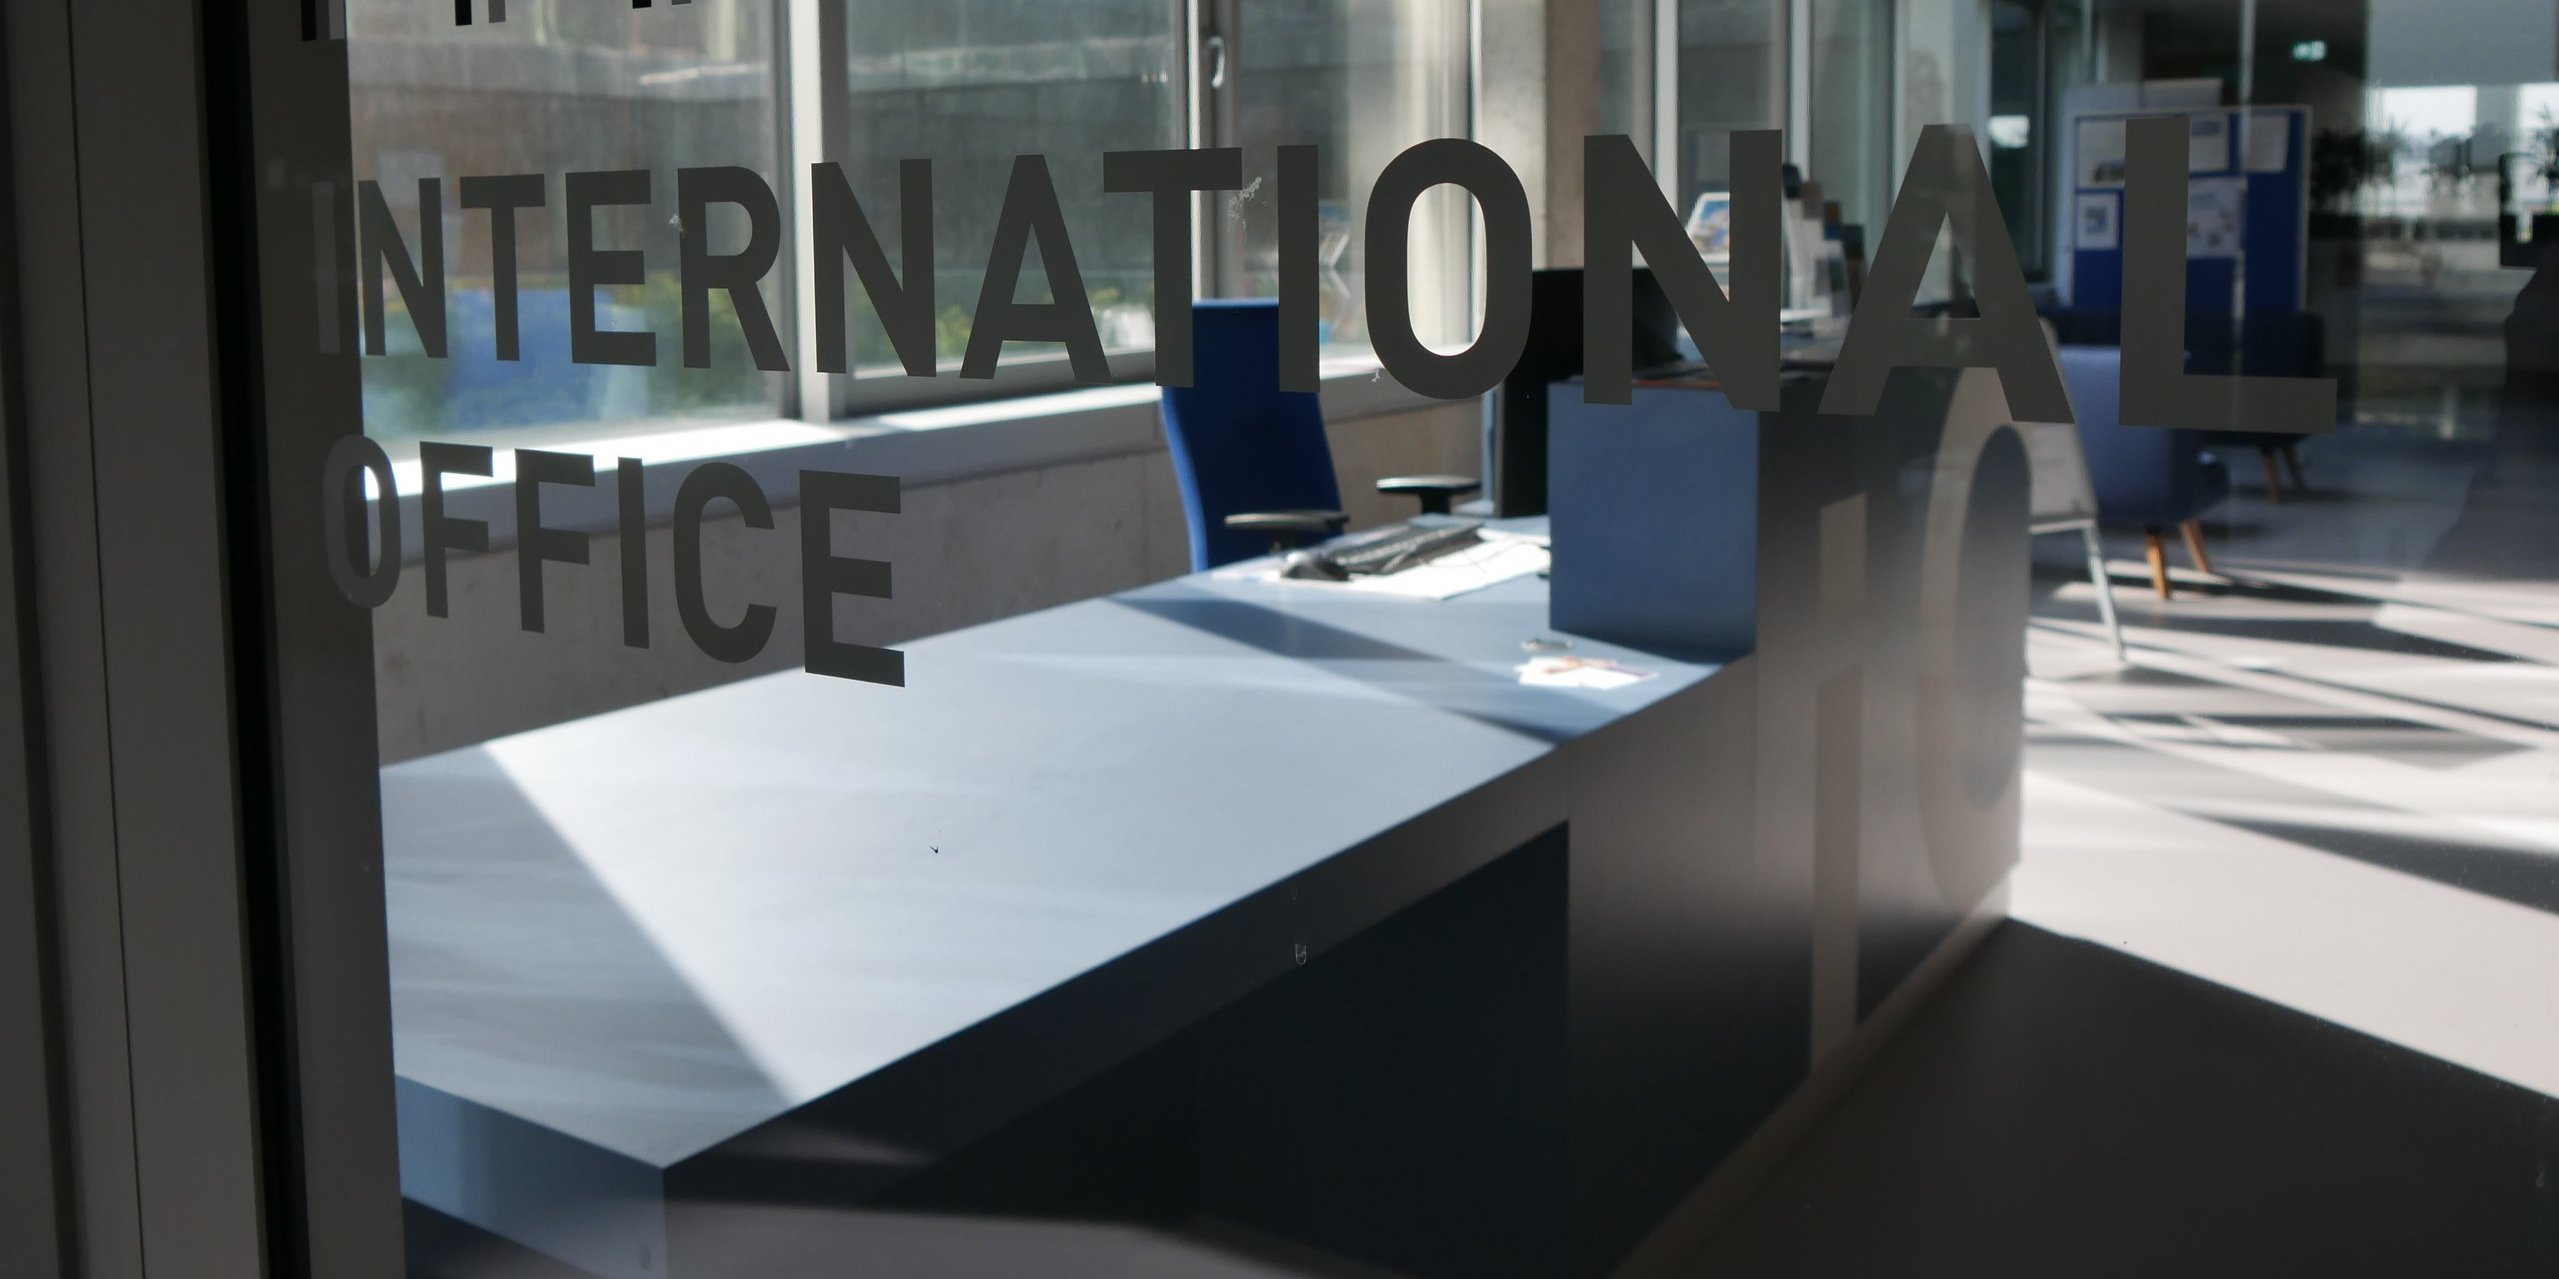 View through the entrance of the International Office, view of the glass with letters on it